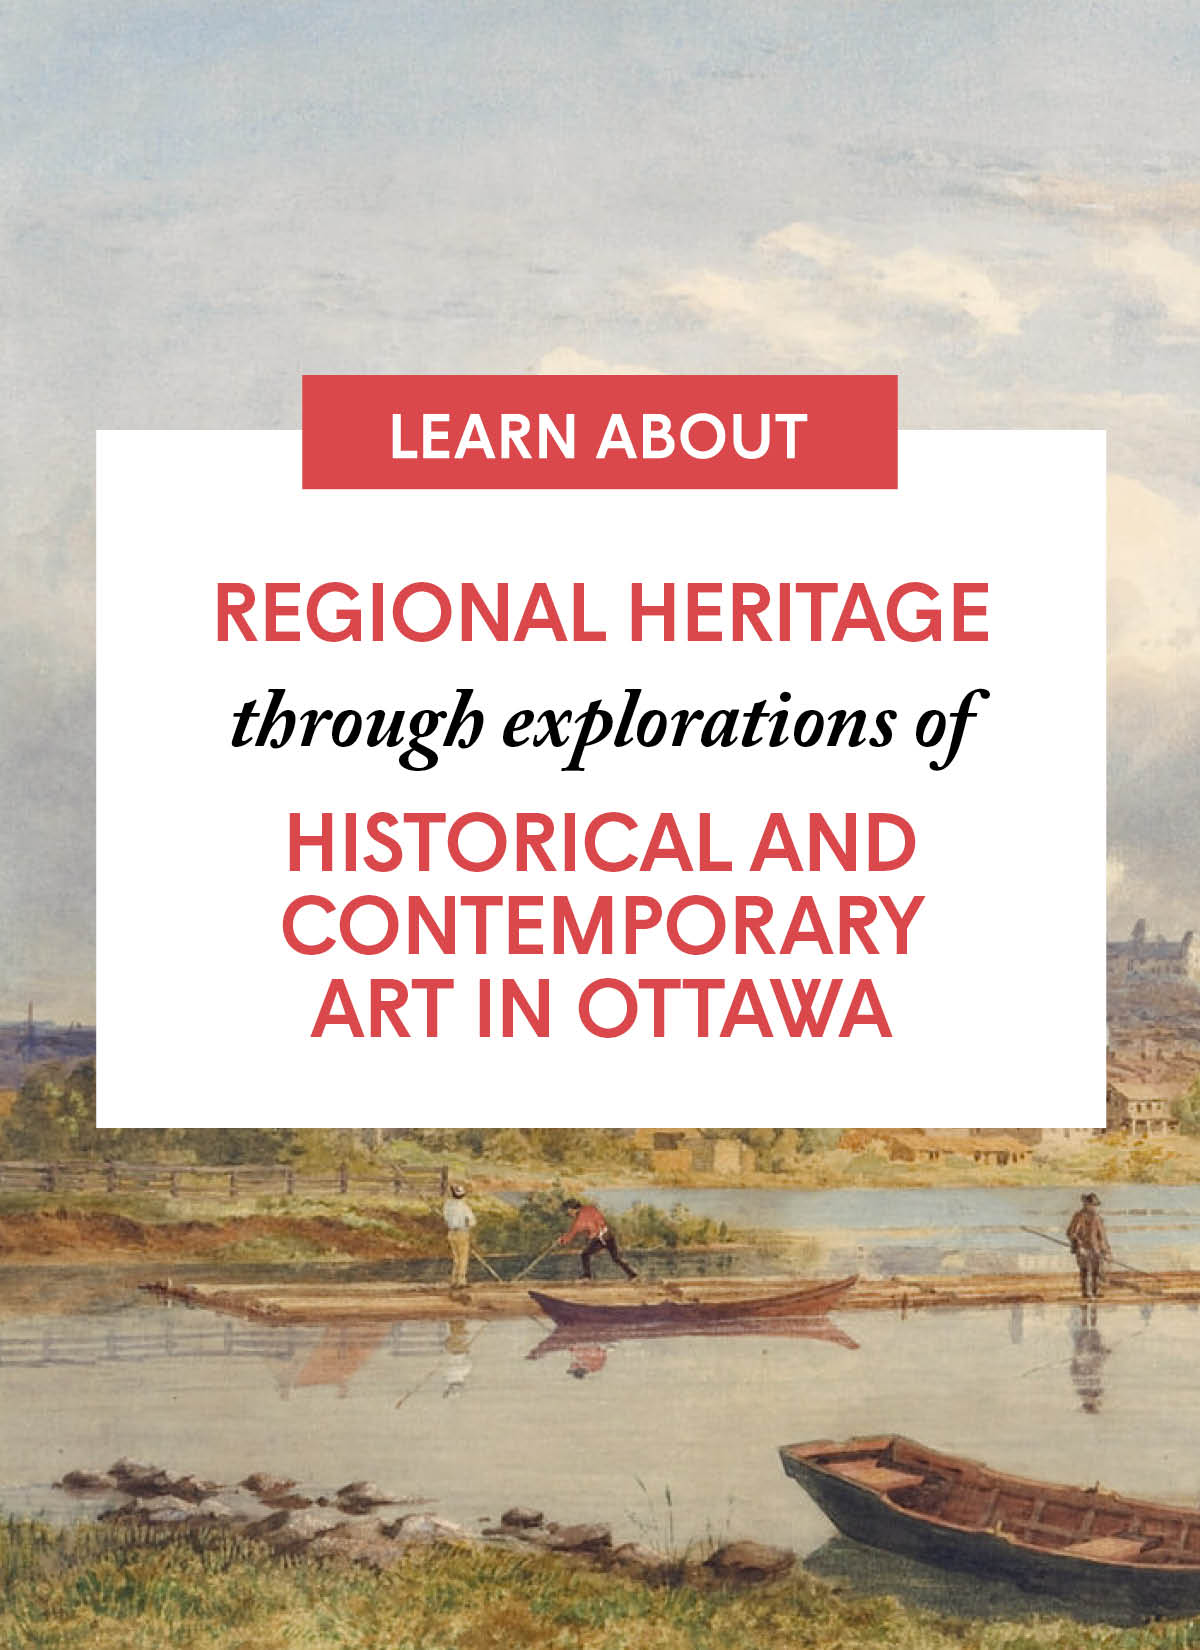 Regional Heritage through explorations of Historical and Contemporary Art in Ottawa